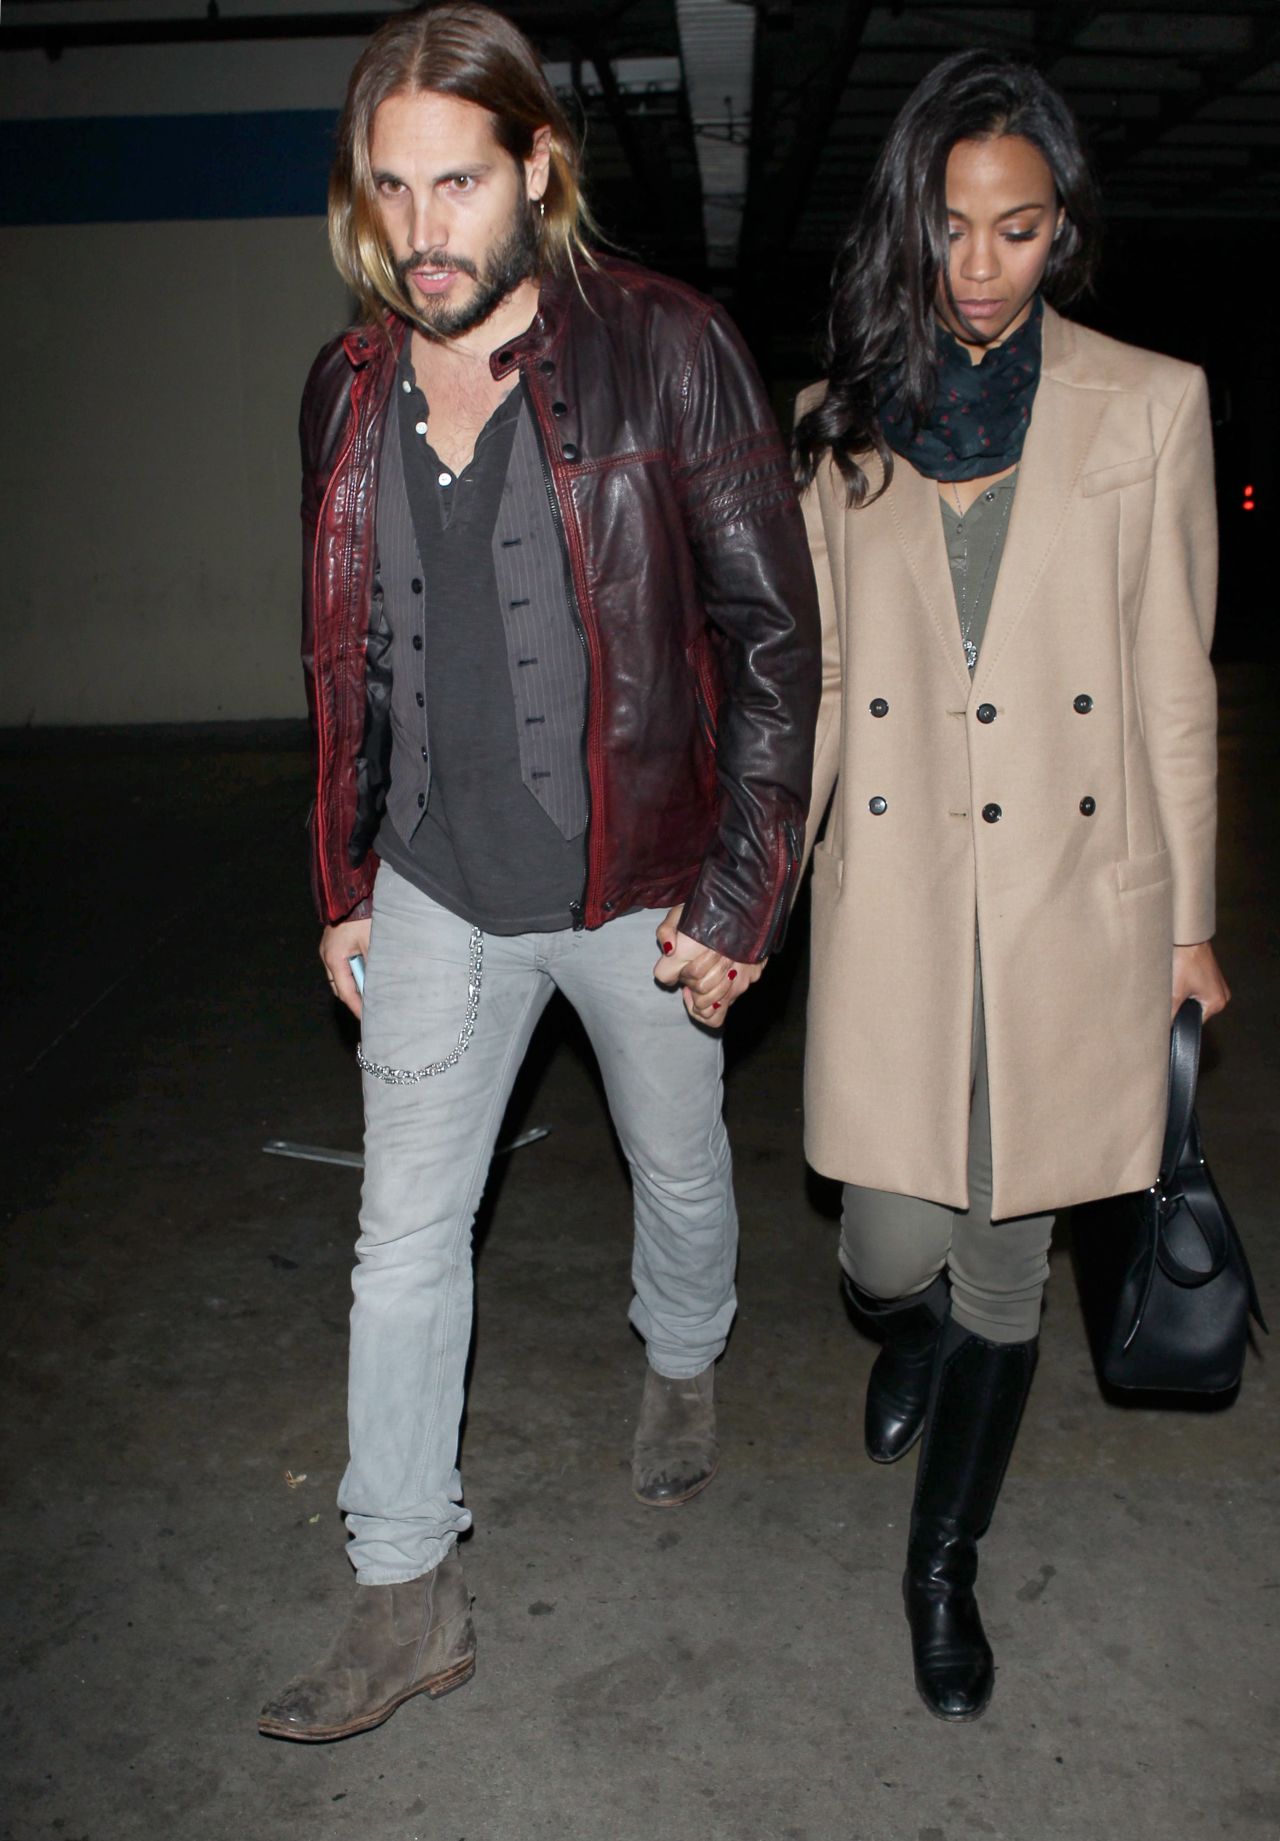 Zoe Saldana and her husband Marco Perego arrive at Beyonce's Los Angeles concert on December 3. 